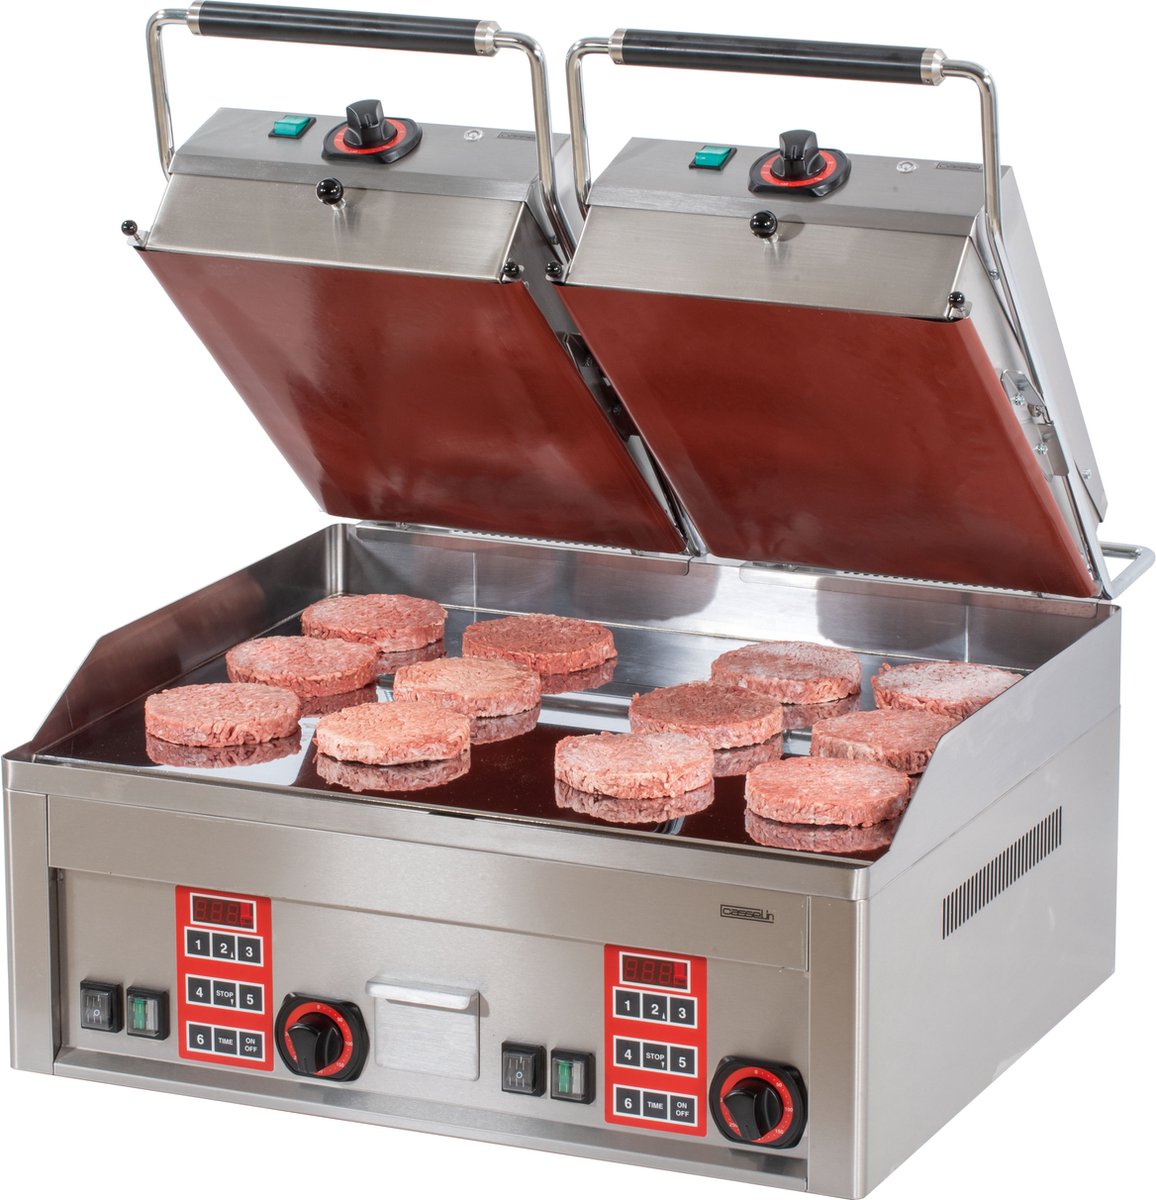 Dubbele electrische contact grill - Steak grill